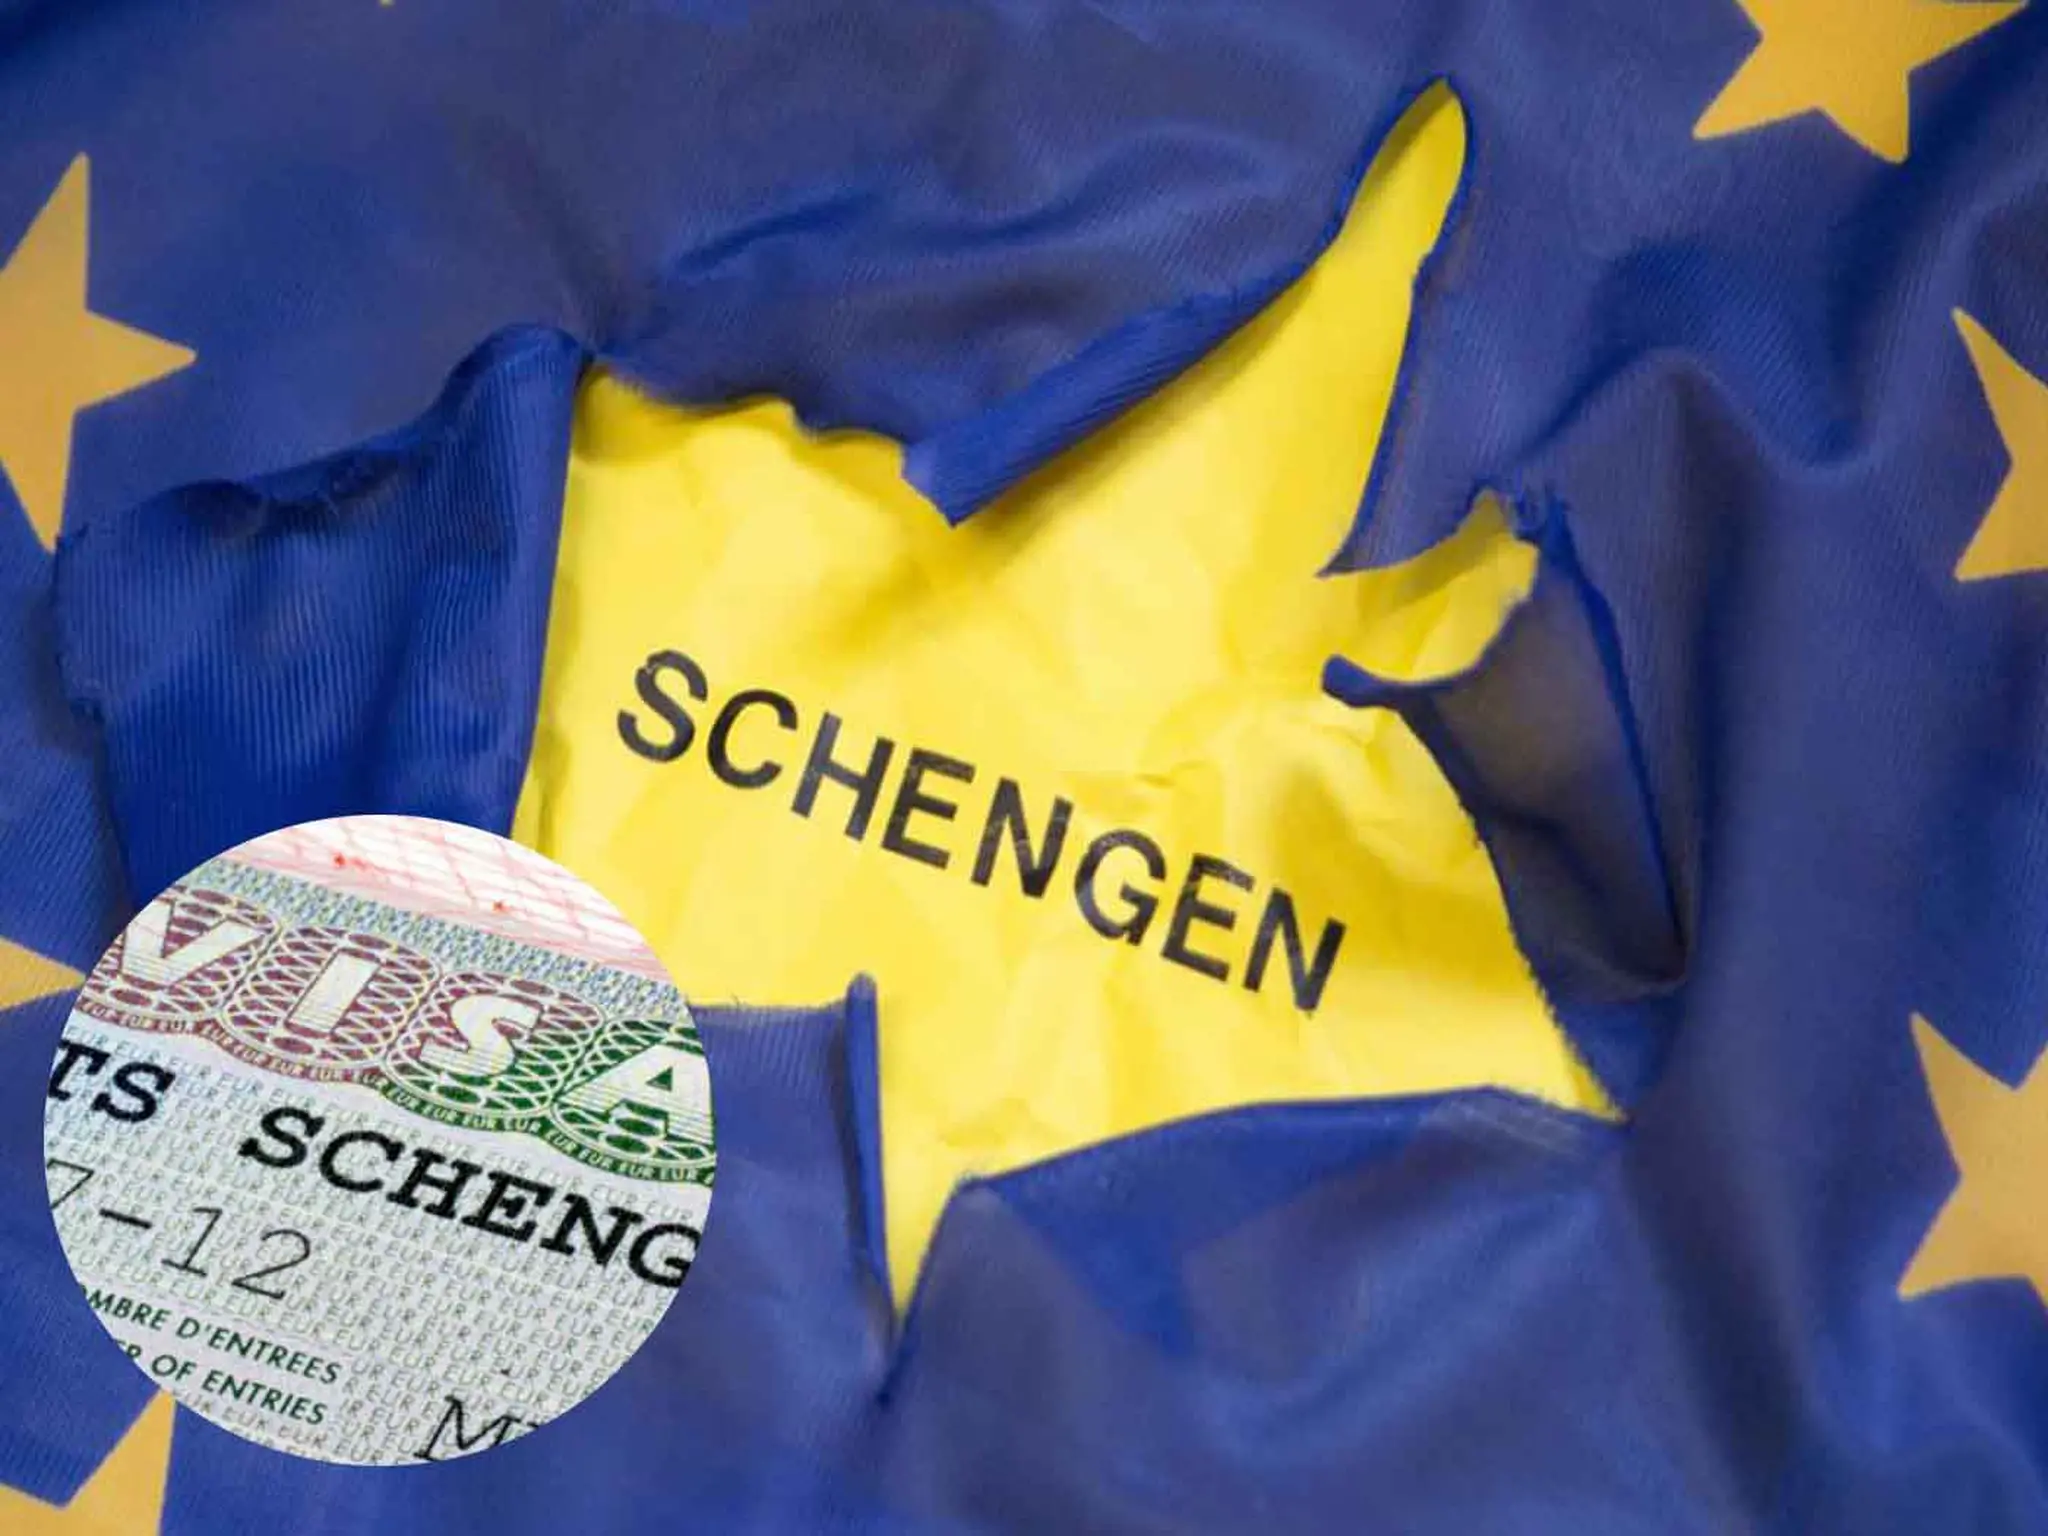 Citizens of this country can visit Schengen area without visas for 180 days